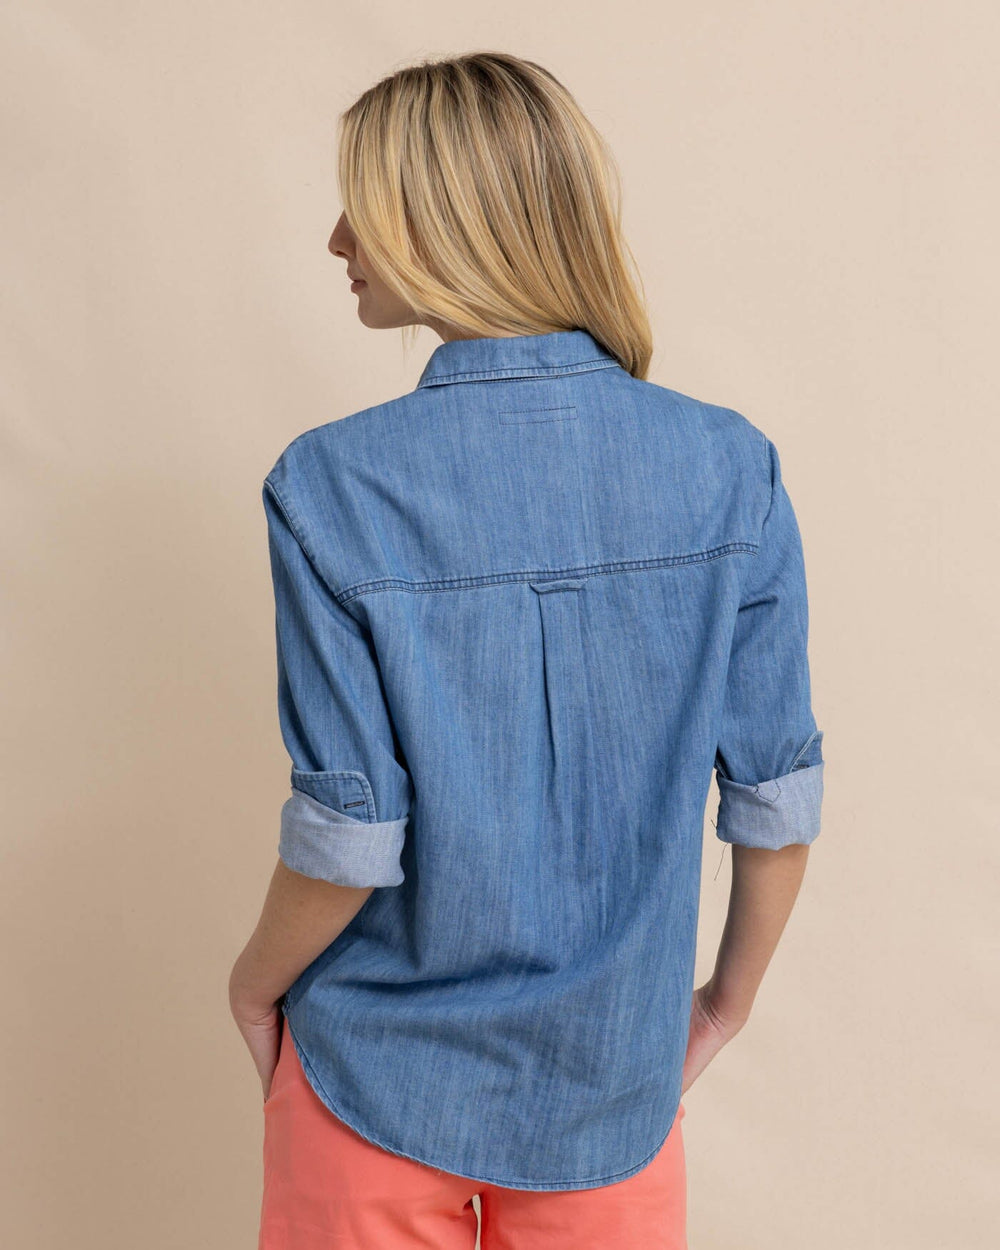 The back view of the Southern Tide Katherine Denim Shirt by Southern Tide - Medium Wash Indigo